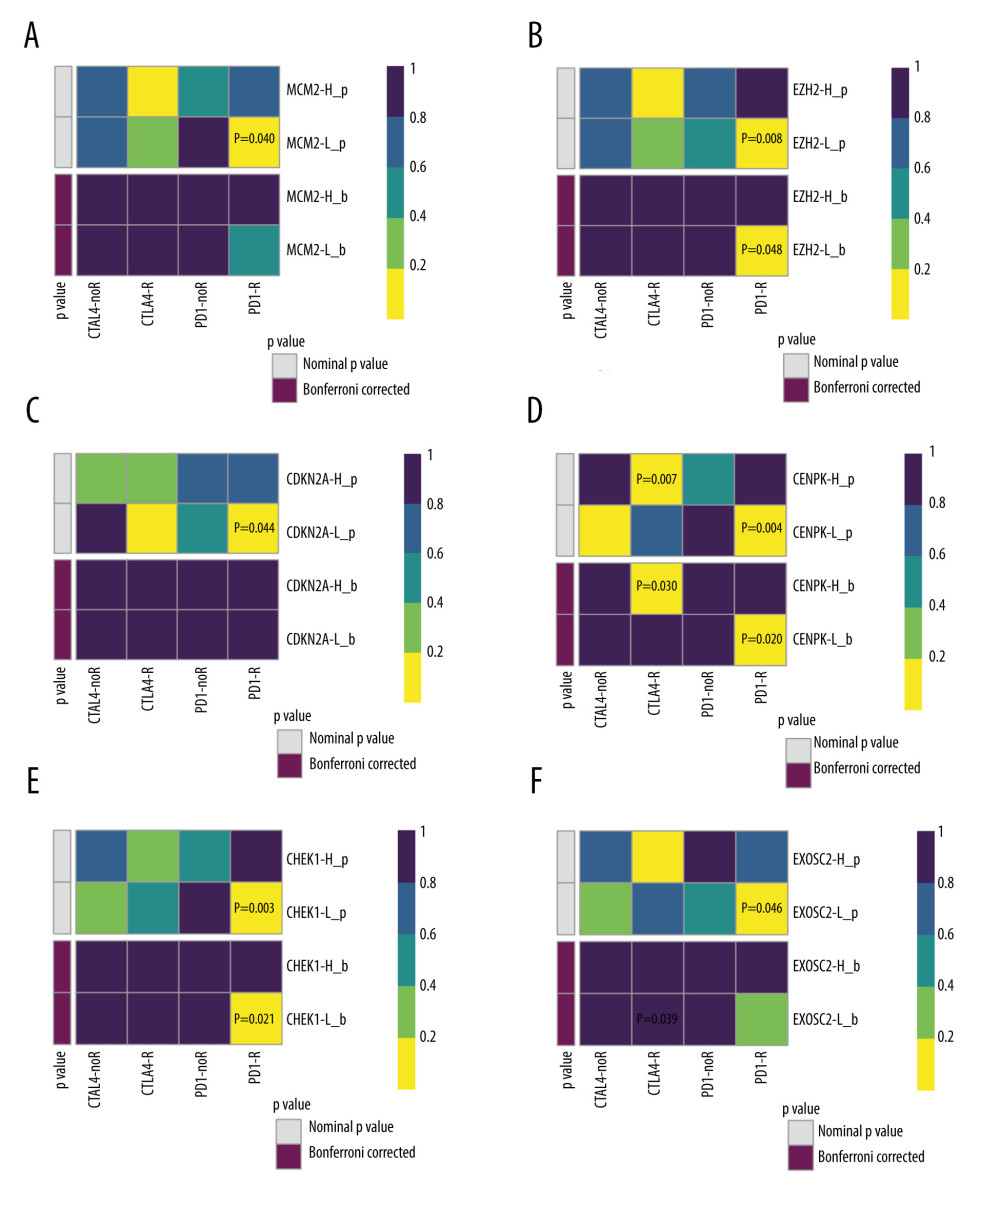 Validation of the 6 key genes to predict immunotherapeutic response in the CCLE cohort. (A) There was no significant correlation between MCM2 and immune response. (B) Low expression of EZH2 was correlated with favorable response to anti-PD-1 treatment. (C) There was no significant correlation between CDKN2A and immune response (D) Low expression of CENPK was correlated with favorable response to anti-PD-1 treatment. (E) Low expression of CHEK1 was correlated with favorable response to anti-PD-1 treatment. (F) There was no significant correlation between EXOSC2 and immune response. R – response; noR – no response; -L – low-expression group of certain gene; -H – high-expression group of certain gene. (R software (Version 4.0.0, http://www.r-project.org)).